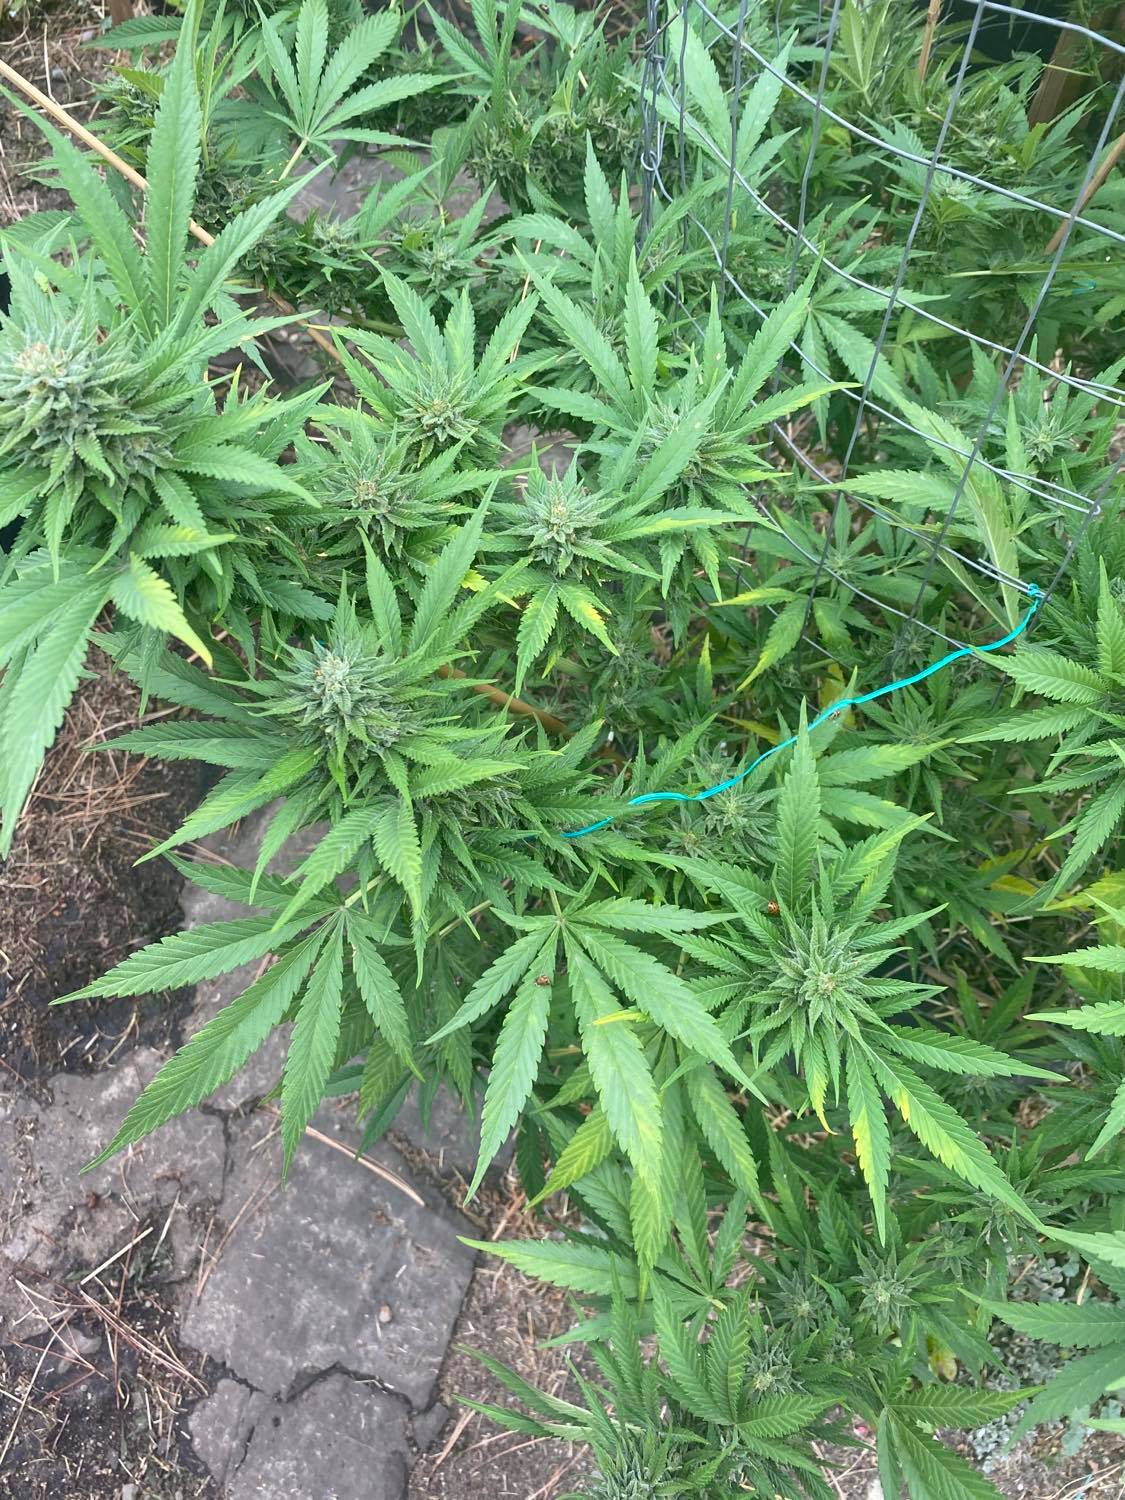 Deficiency help cant figure it out